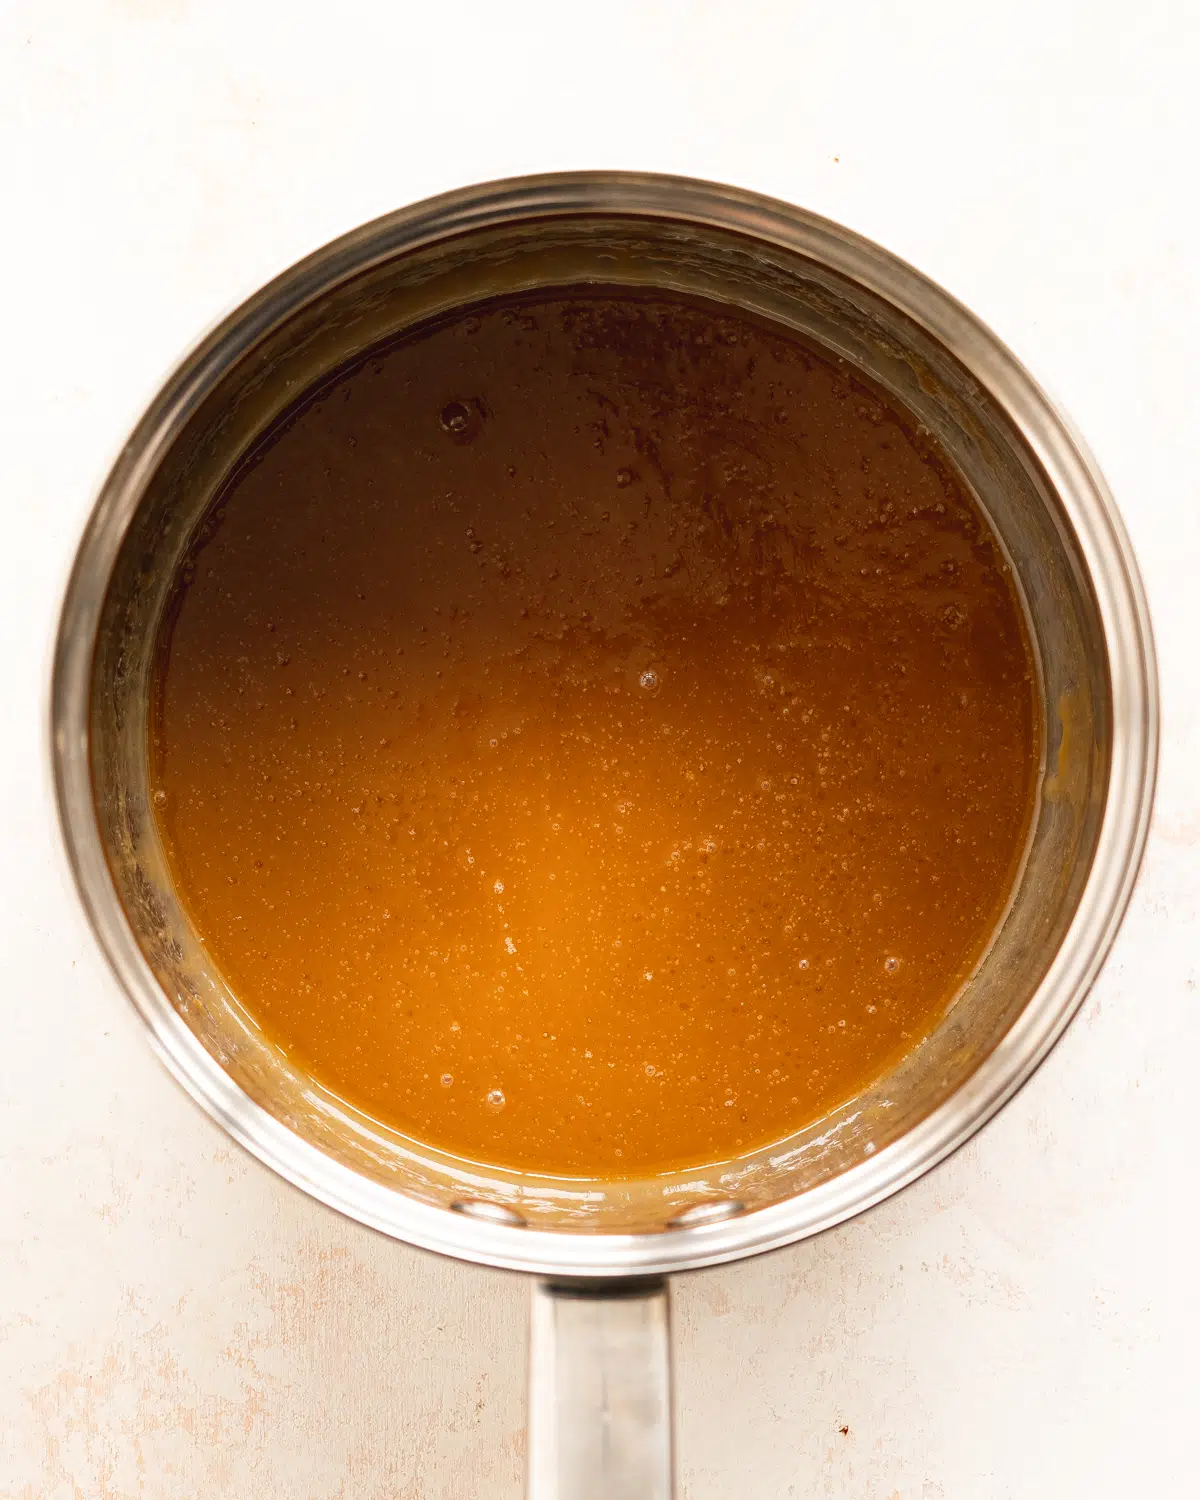 caramel sauce made from dairy free condensed milk.